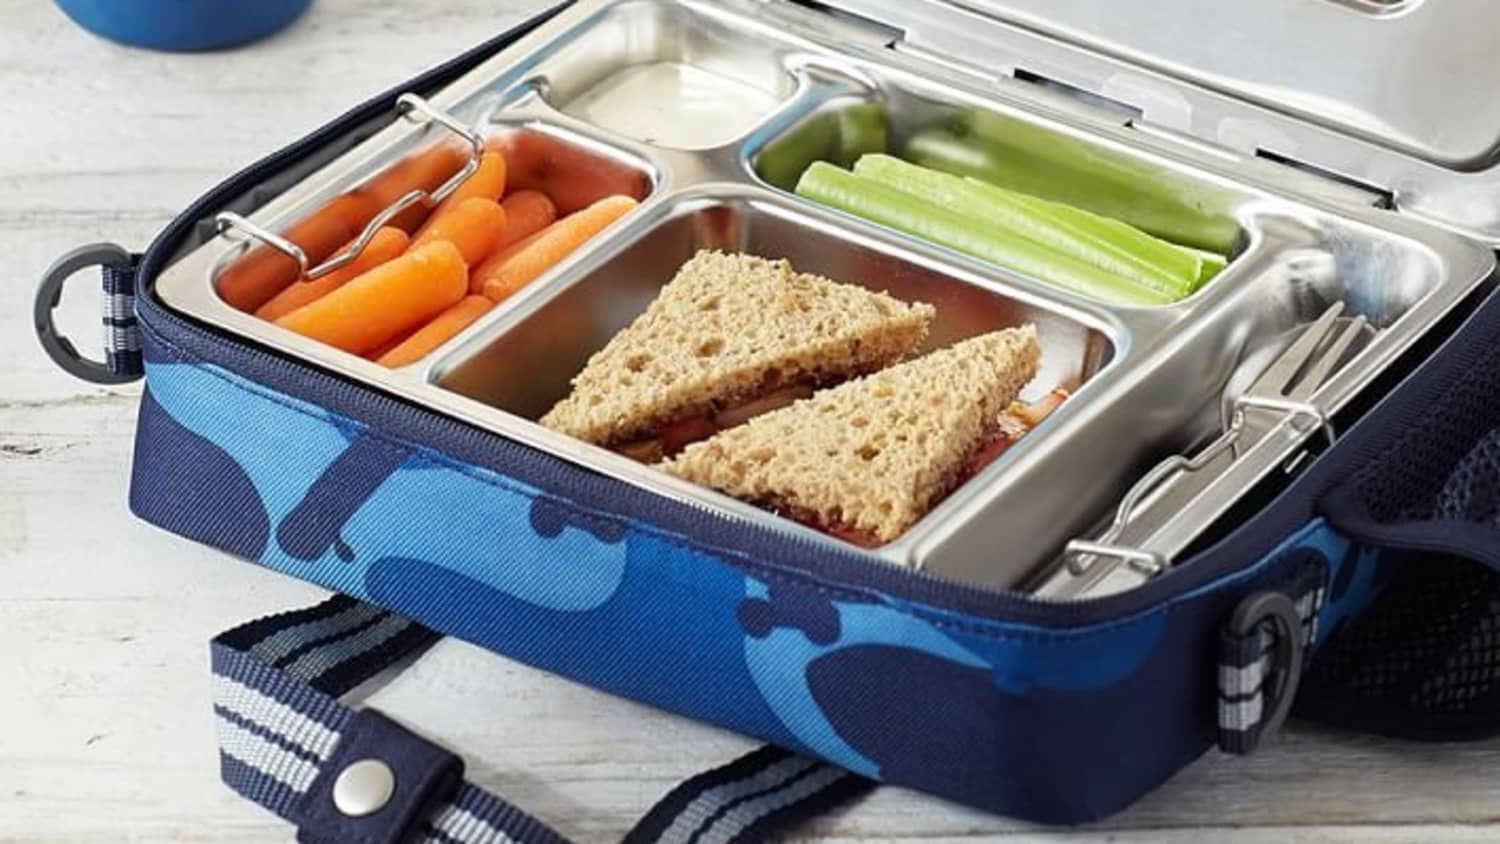 Bento-style Meal Containers For Kids